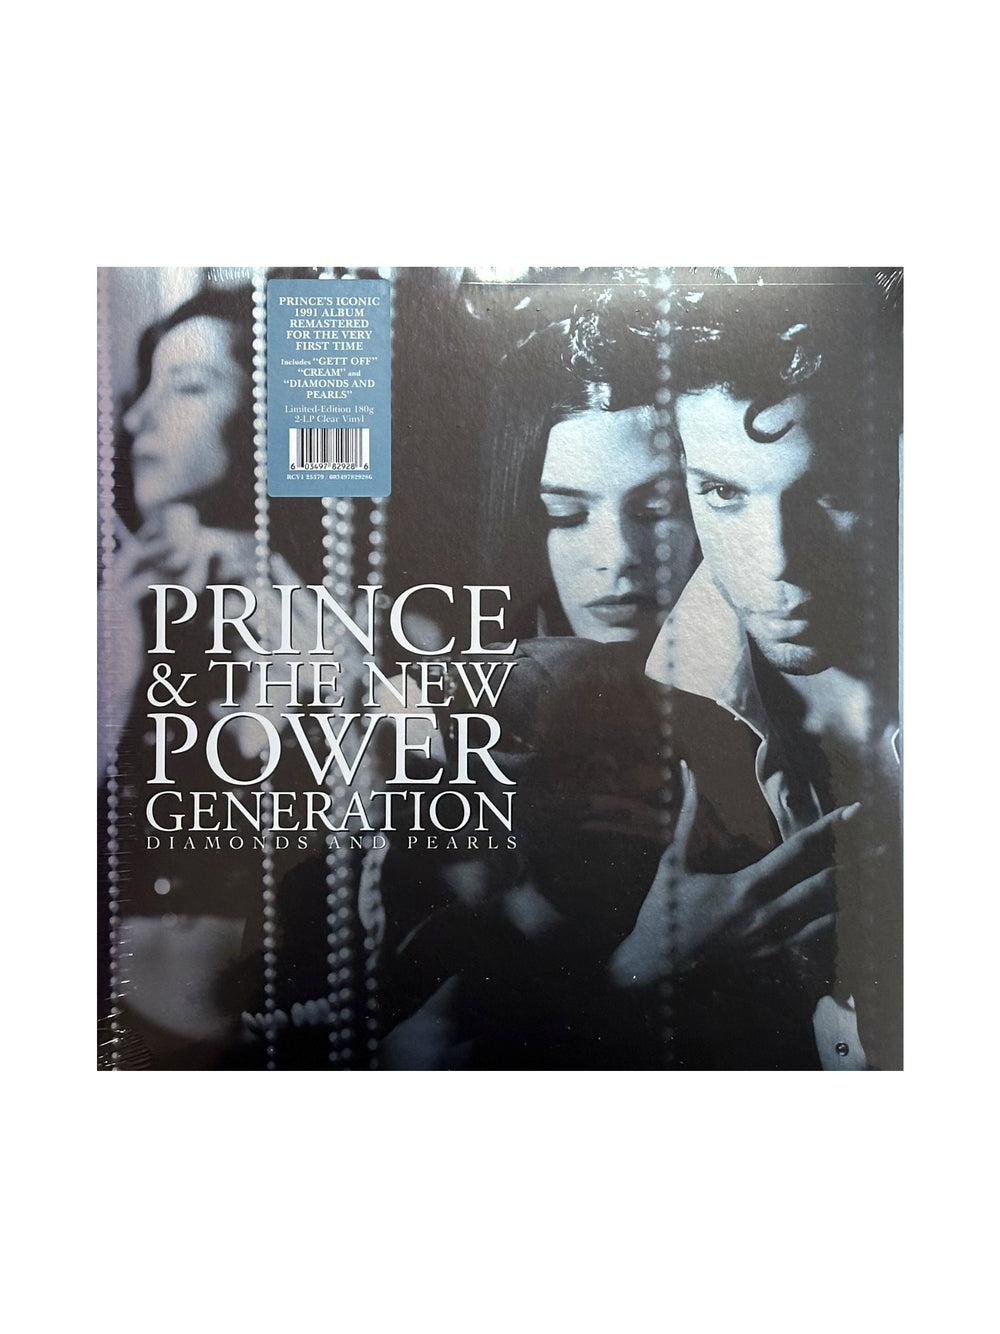 Prince – & The New Power Generation – Diamonds And Pearls Reissue RM 2 LP CLEAR VINYL NEW 2023